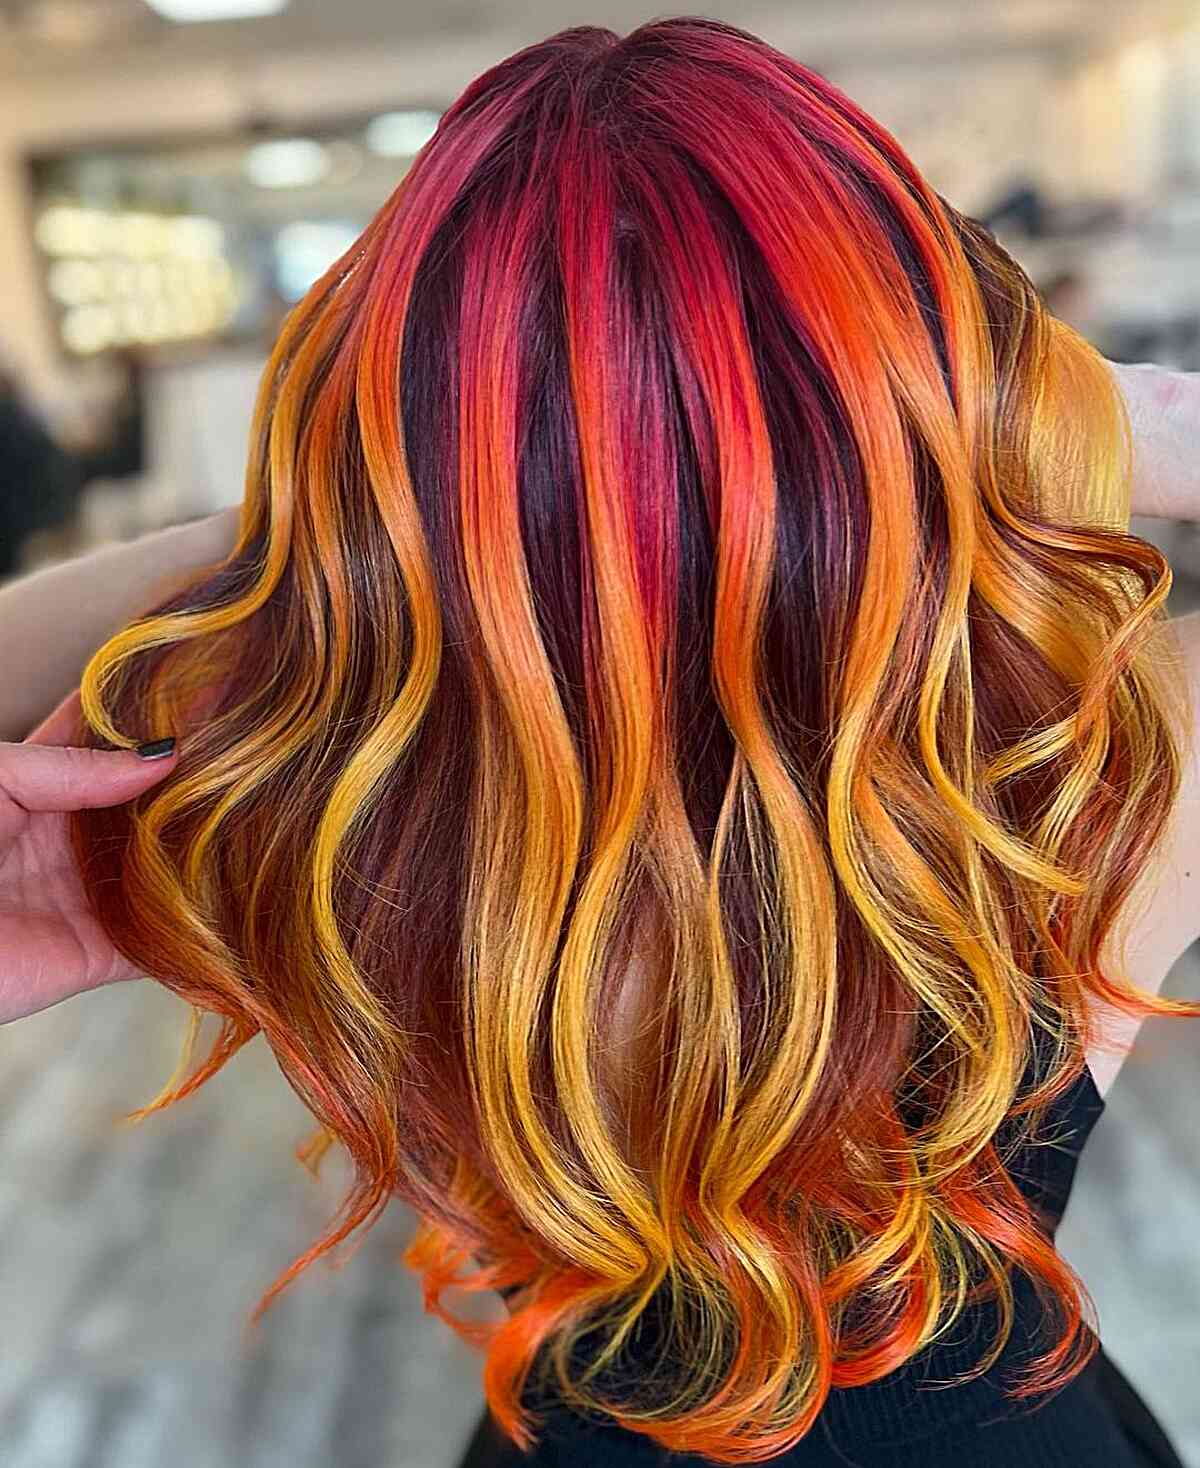 Red, Yellow, and Orange Tones Hair Color Ideas for women with wavy hair